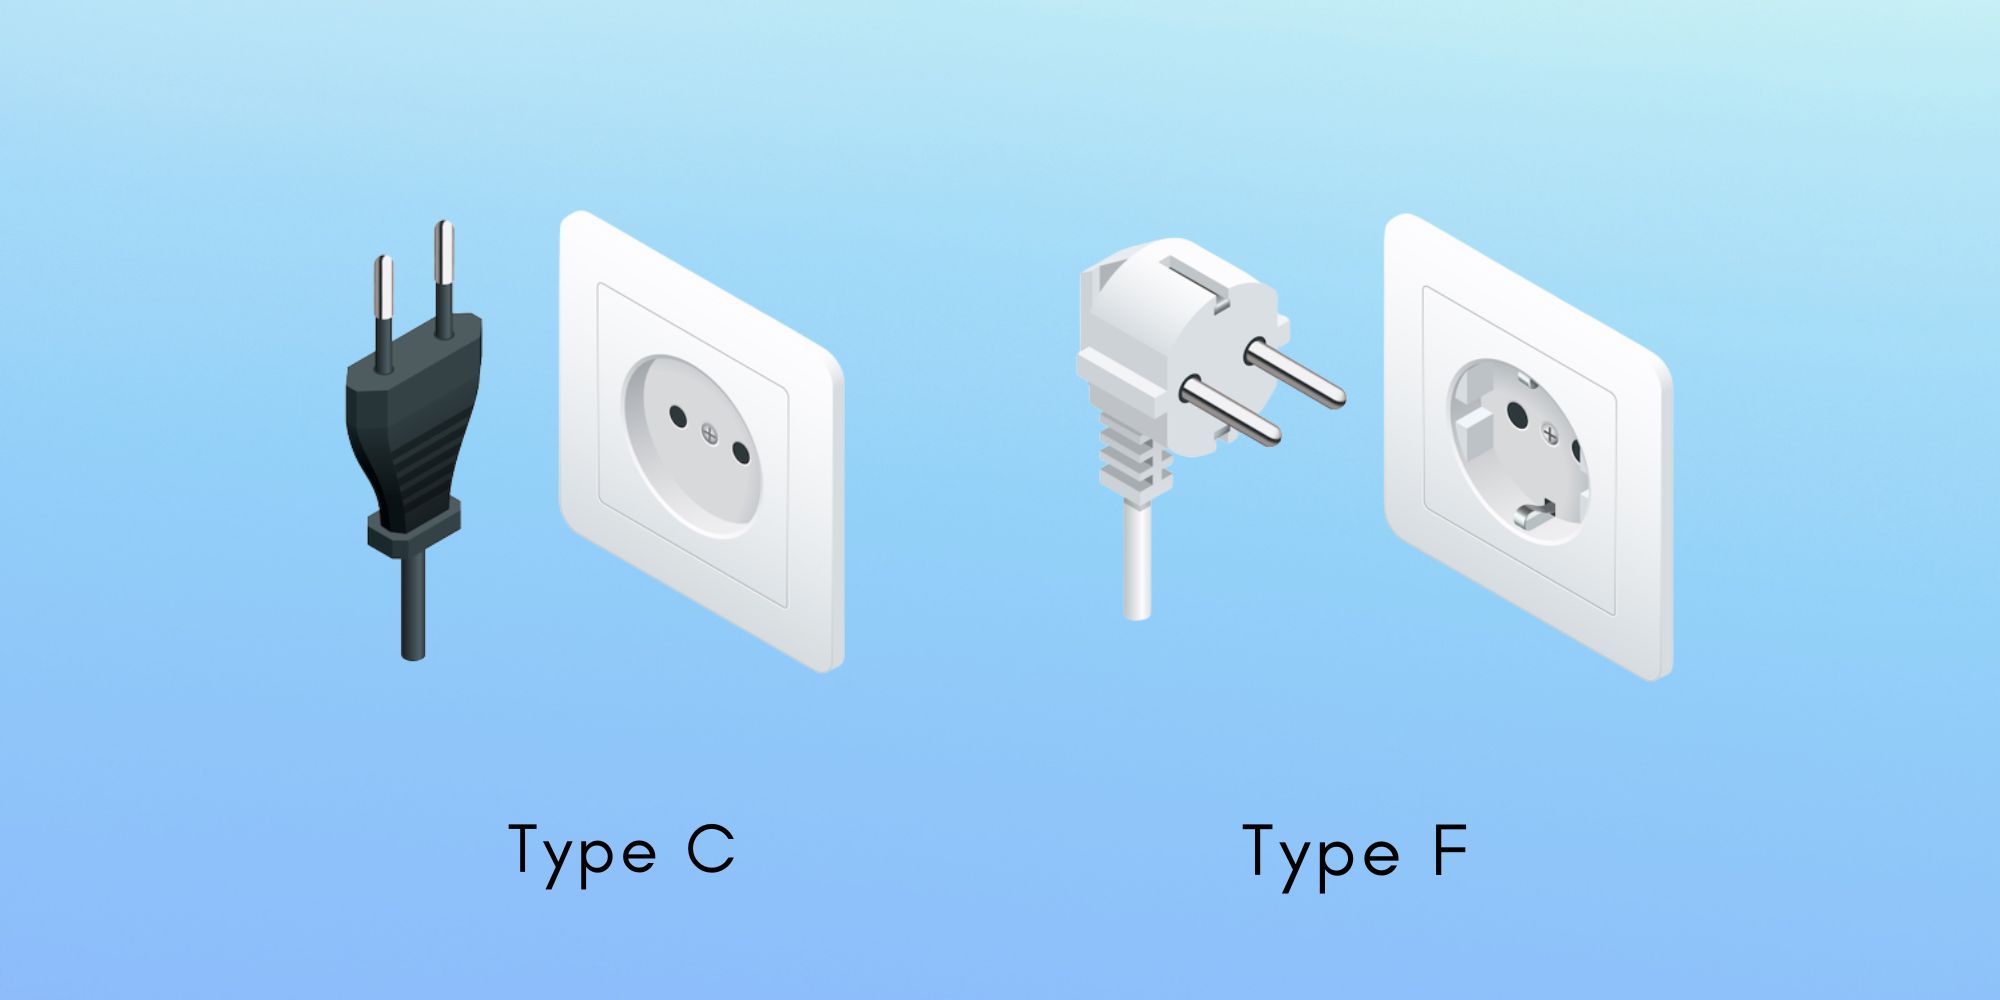 Iran Power Plugs and Sockets: Type C and Type F
